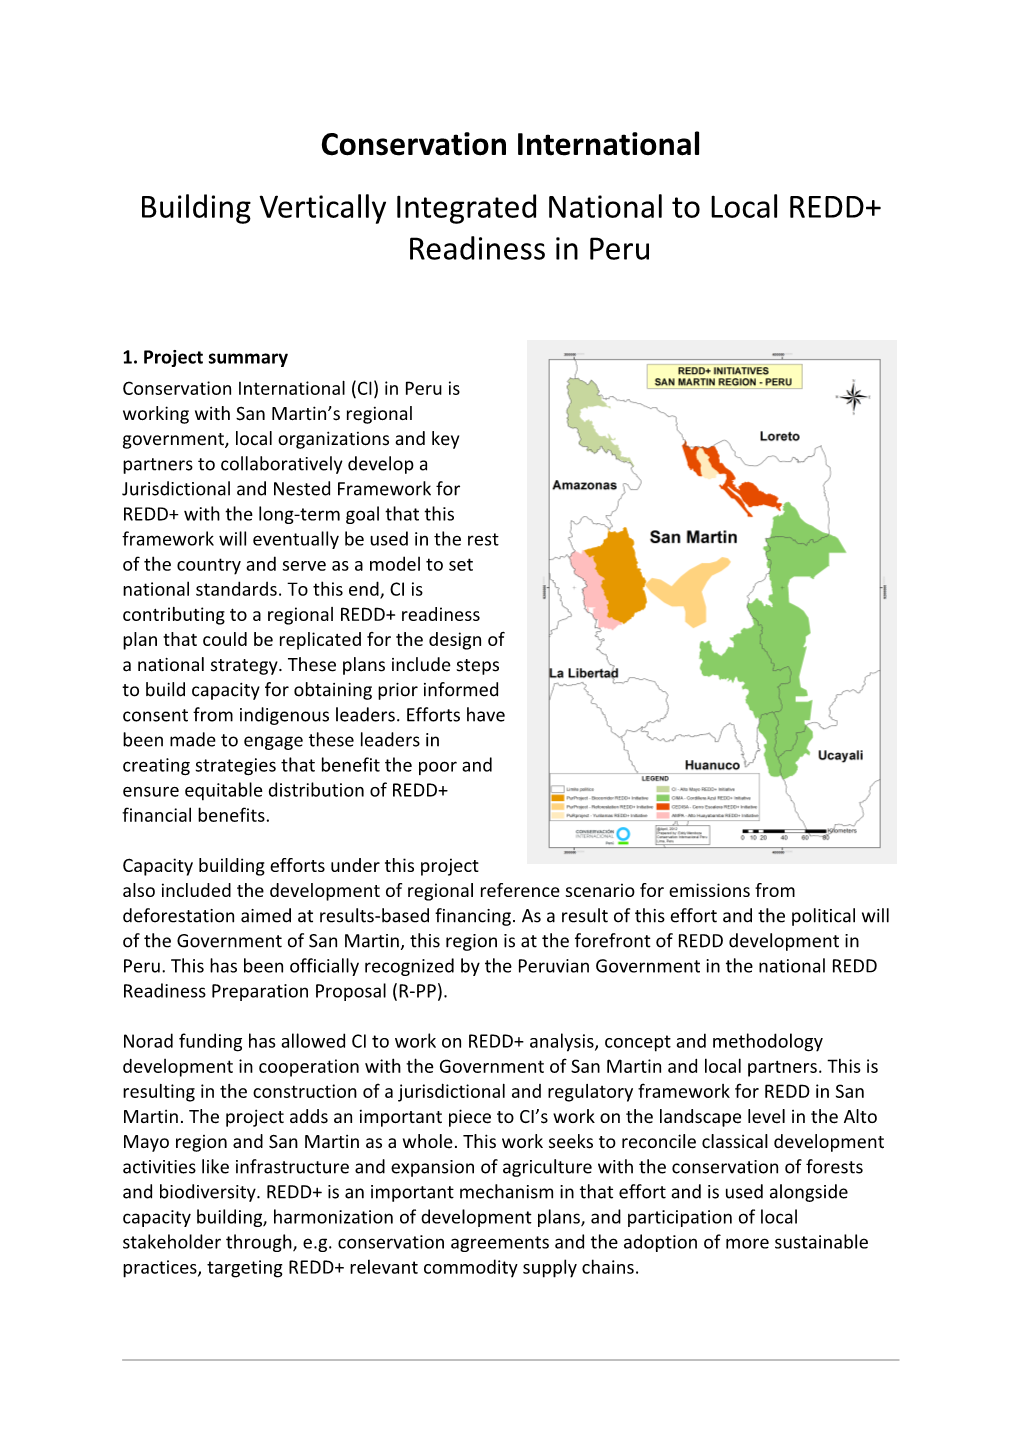 Building Vertically Integrated National to Local REDD+ Readiness in Peru